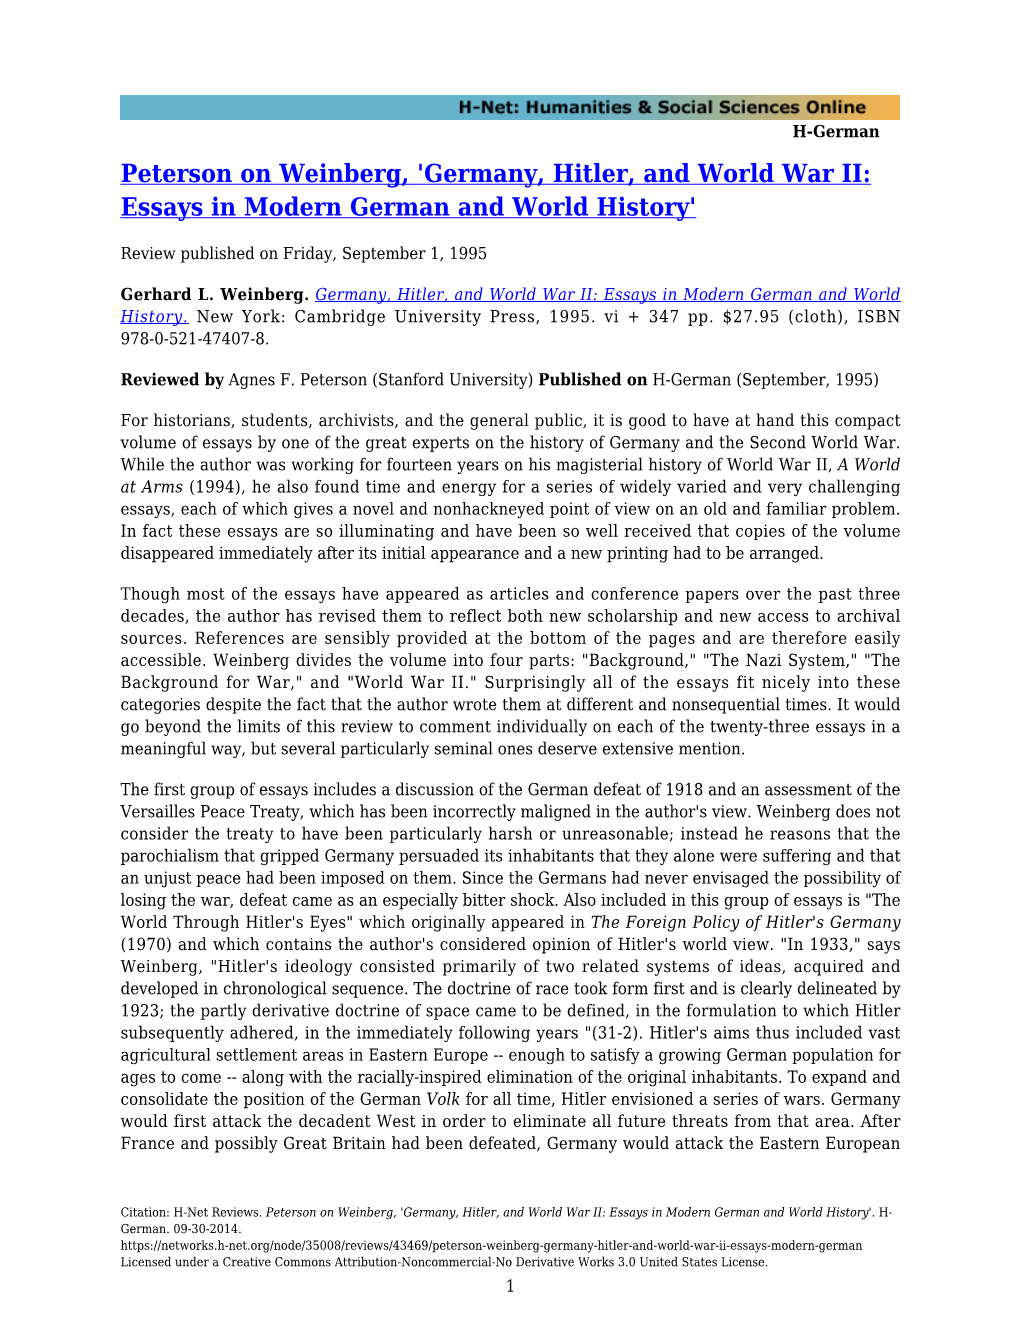 Peterson on Weinberg, 'Germany, Hitler, and World War II: Essays in Modern German and World History'